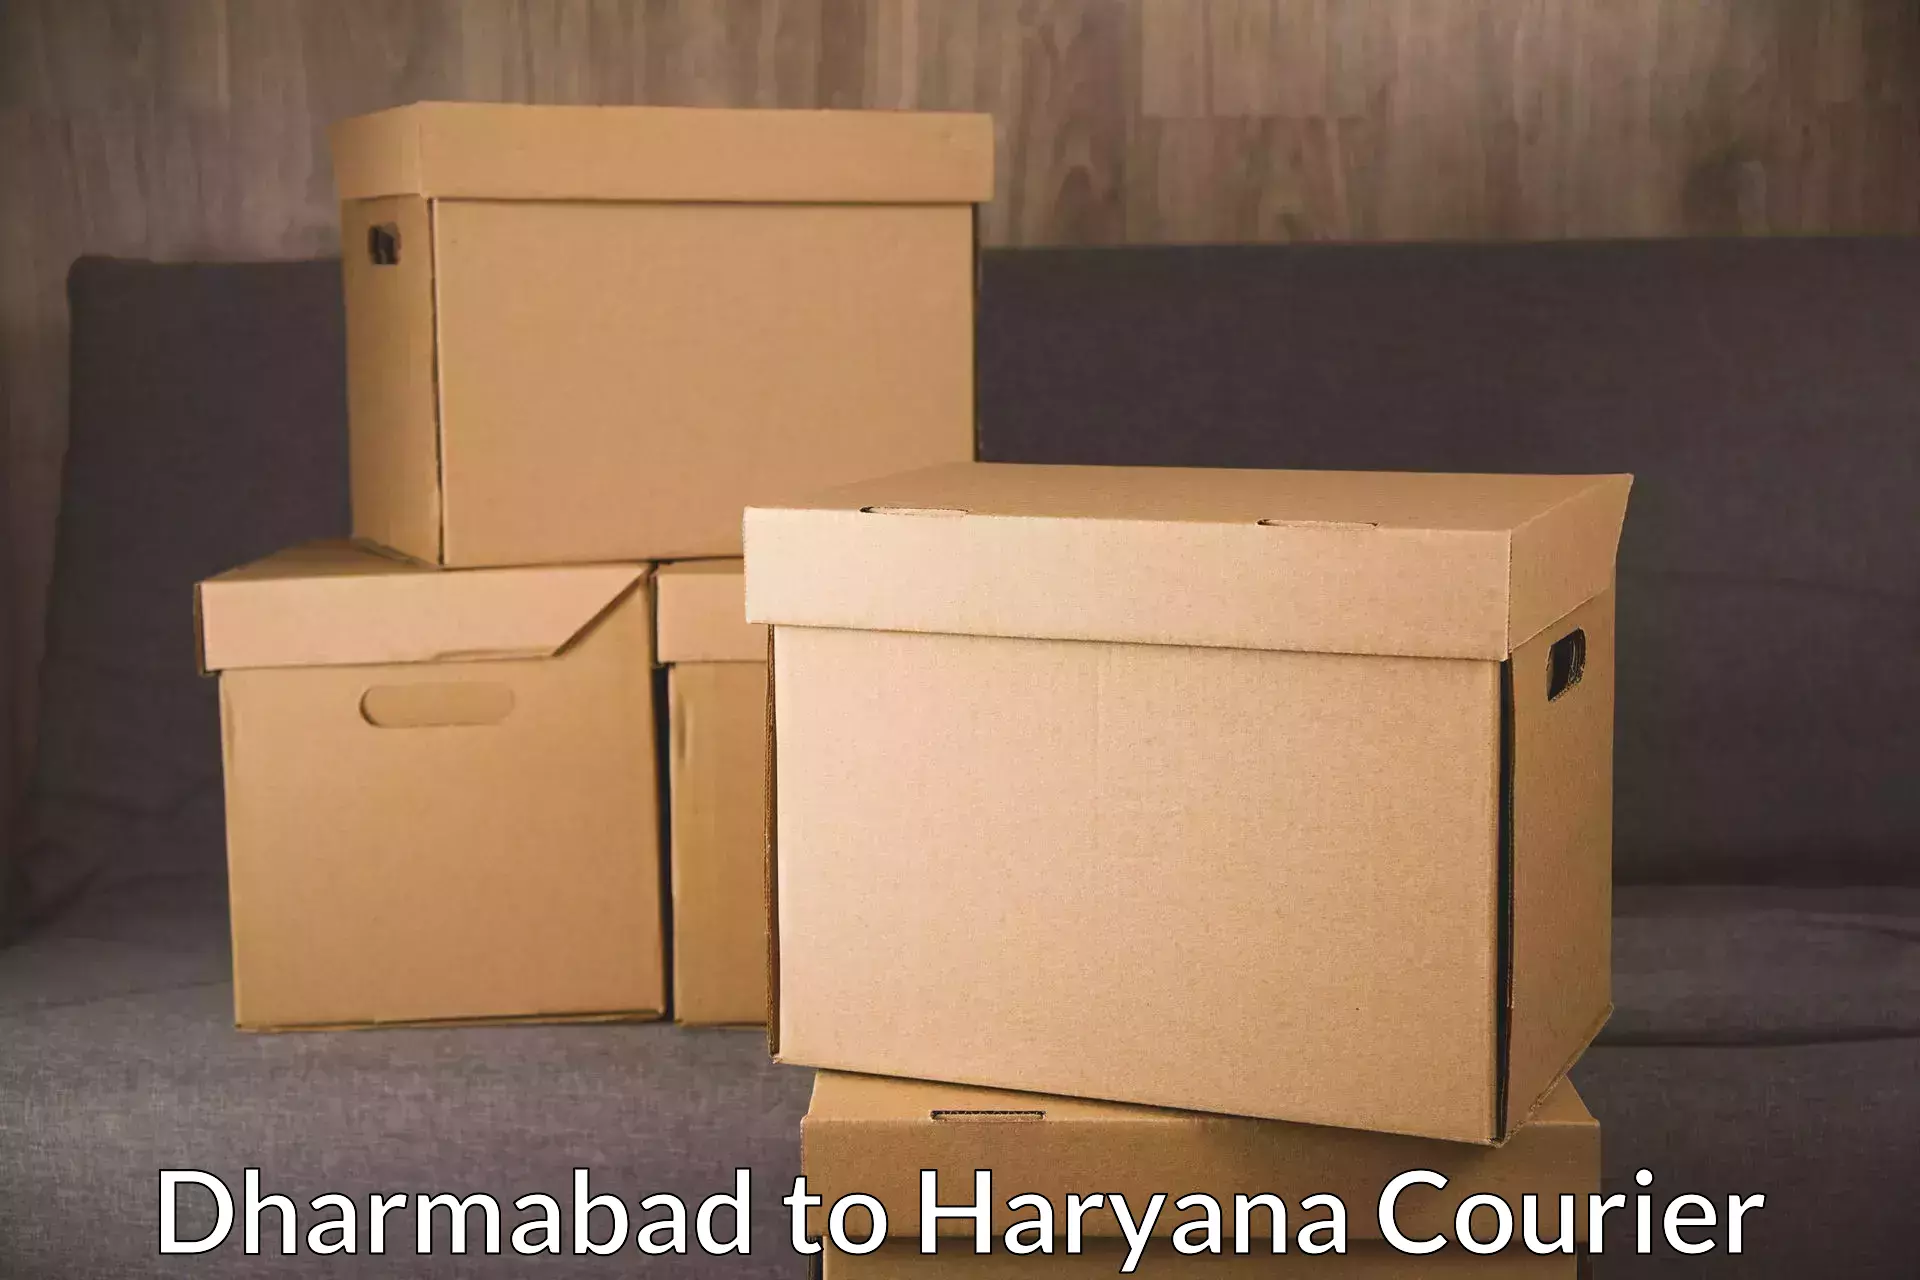 Express package services Dharmabad to Haryana